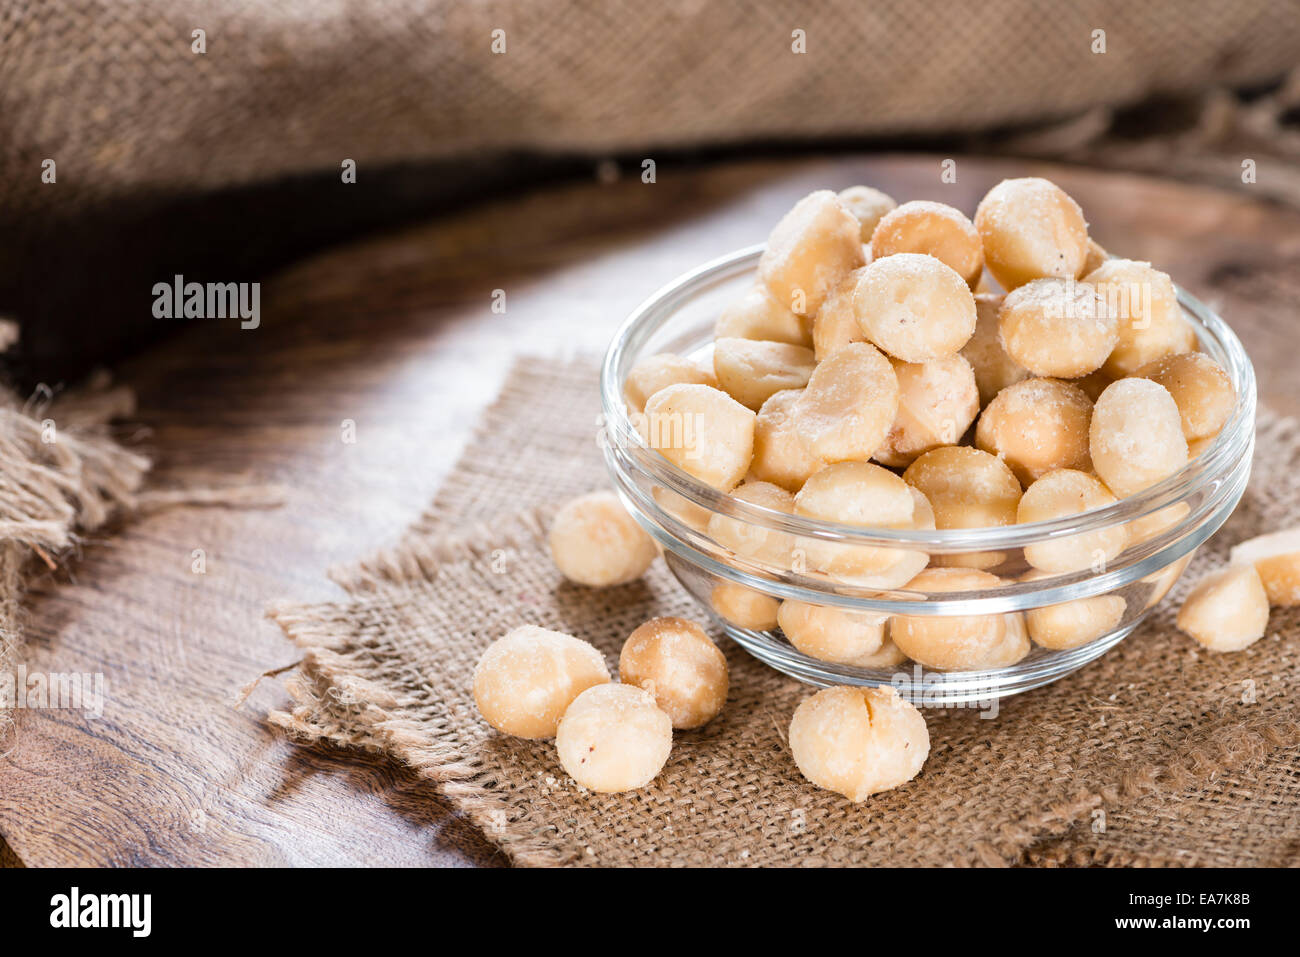 Portion of Macadamia nuts (roasted and salted) on wooden background Stock Photo